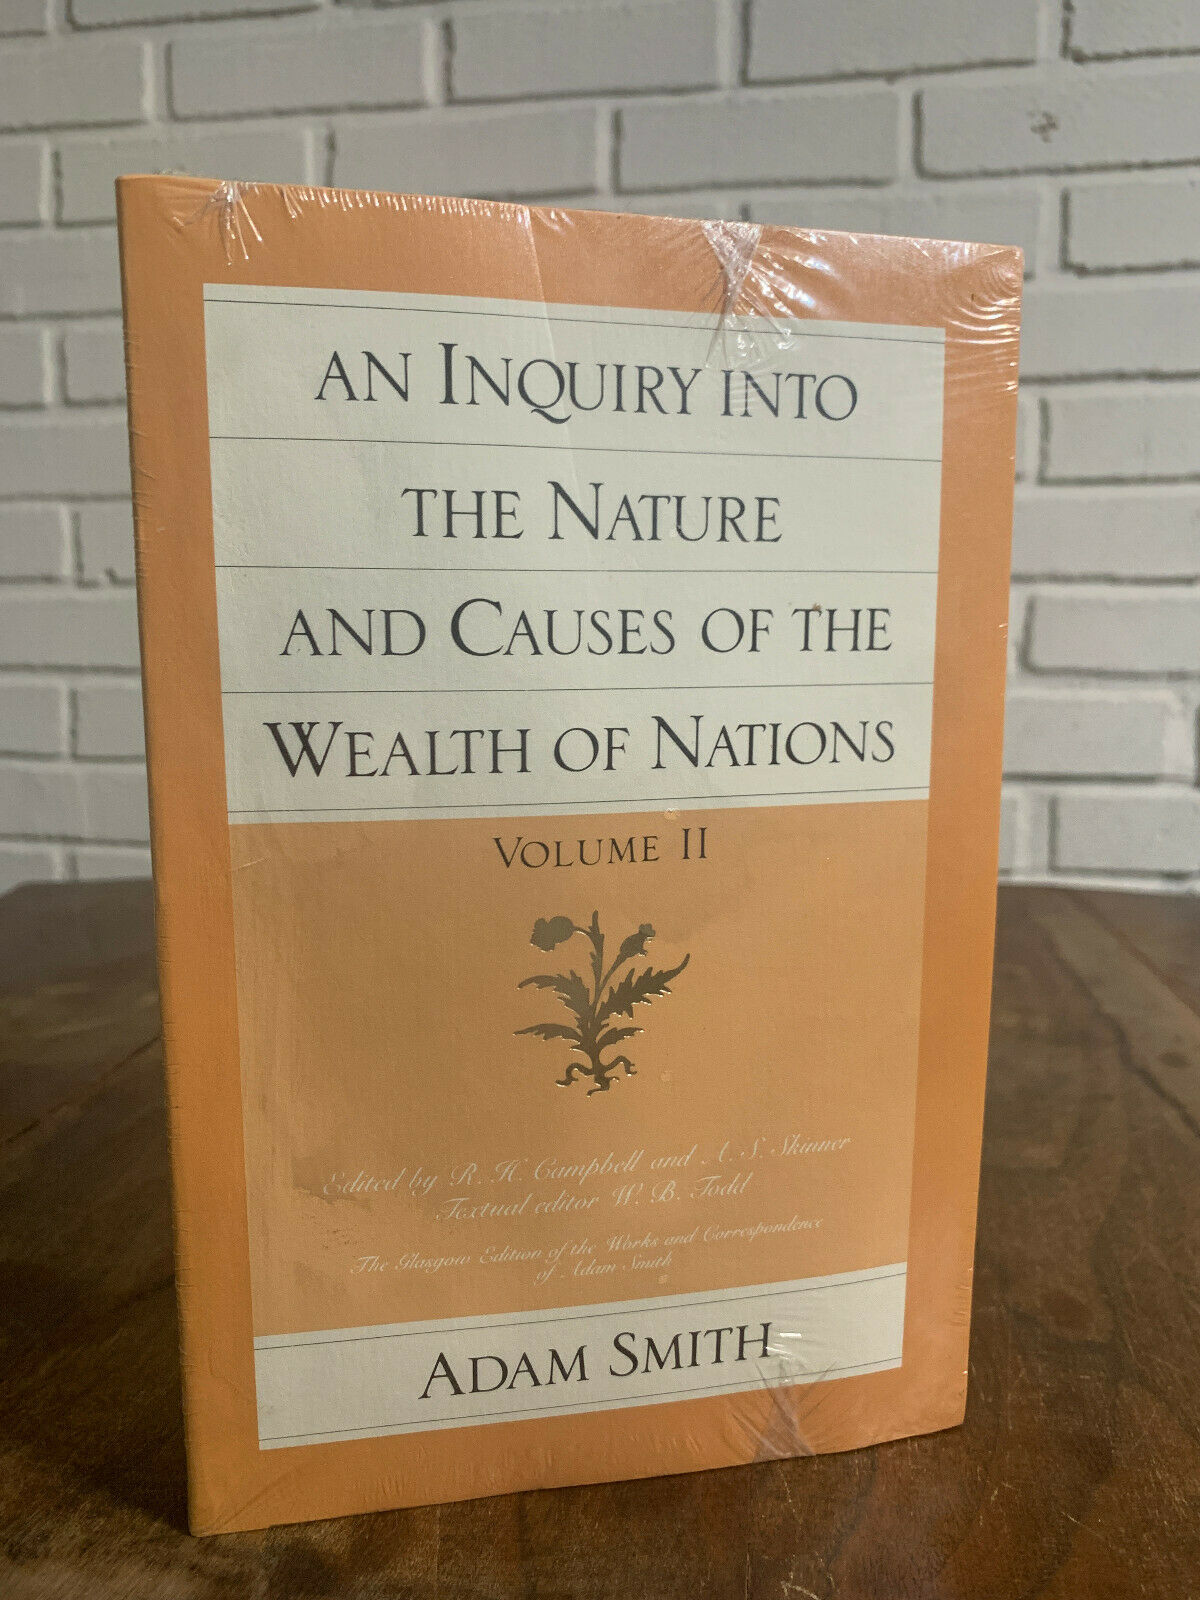 An Inquiry into the Nature and Causes of the Wealth of Nations II, Adam Smith 2A